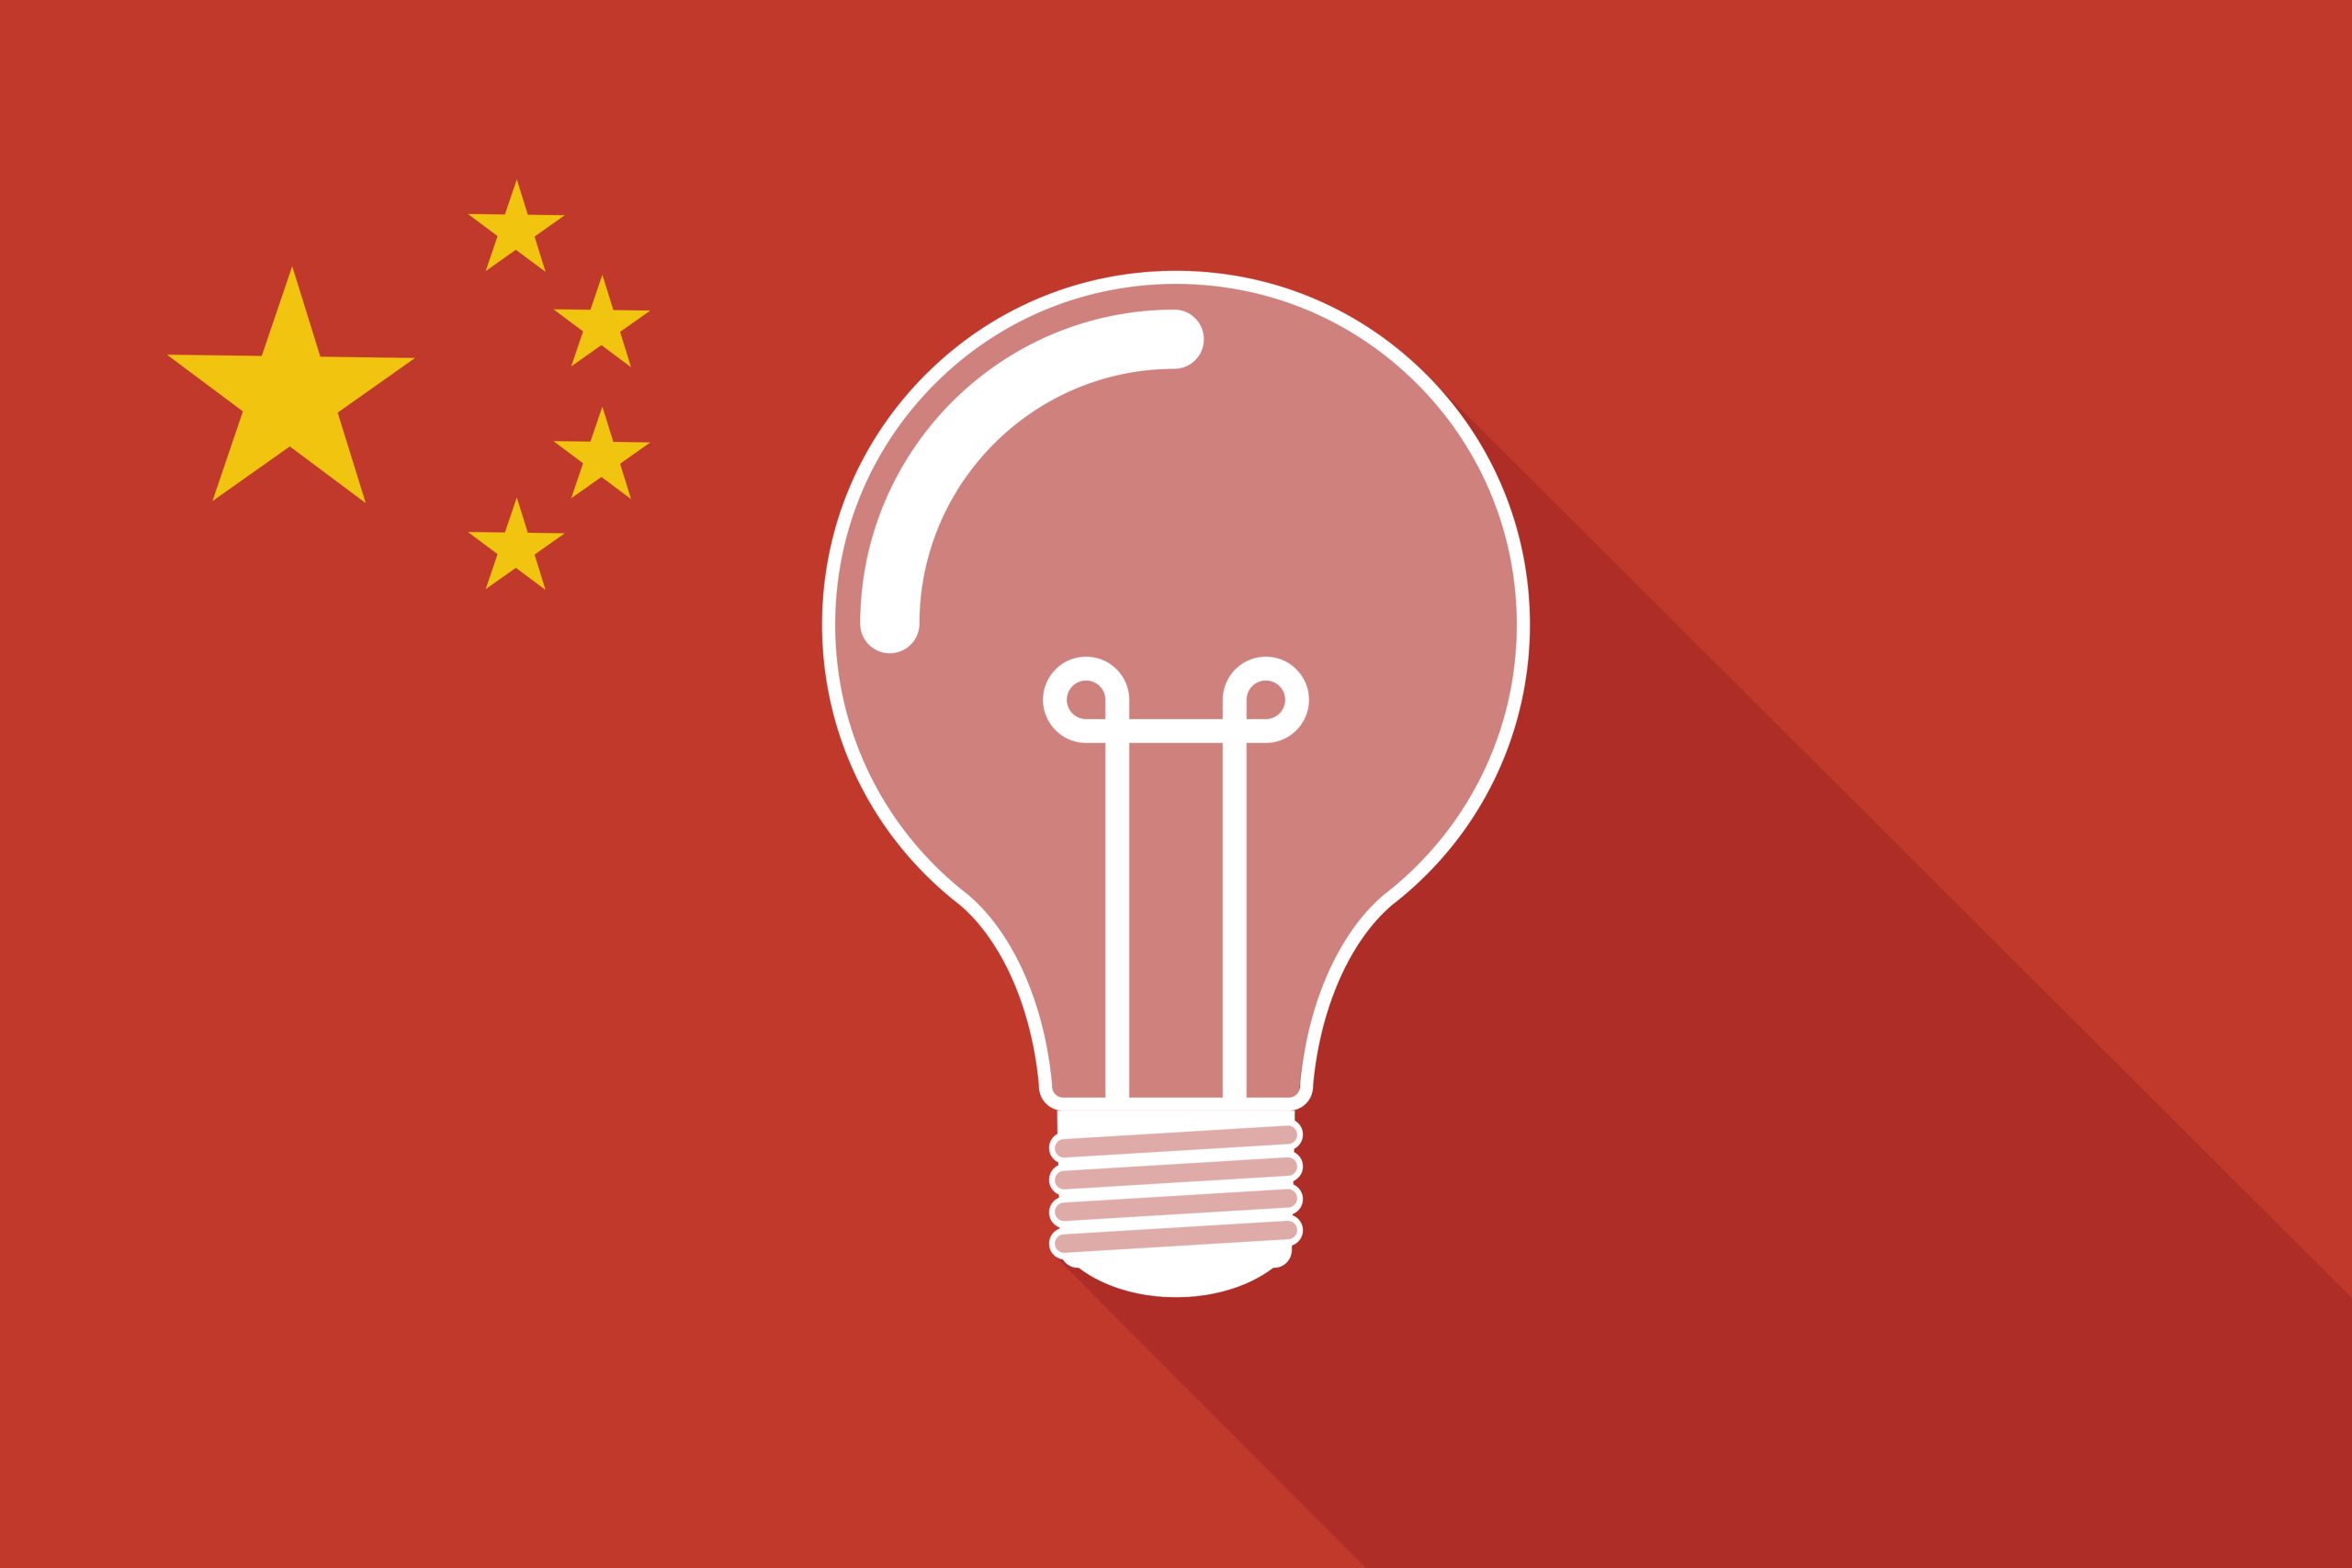 Chinese innovation - https://depositphotos.com/76008441/stock-illustration-china-long-shadow-flag-with.html